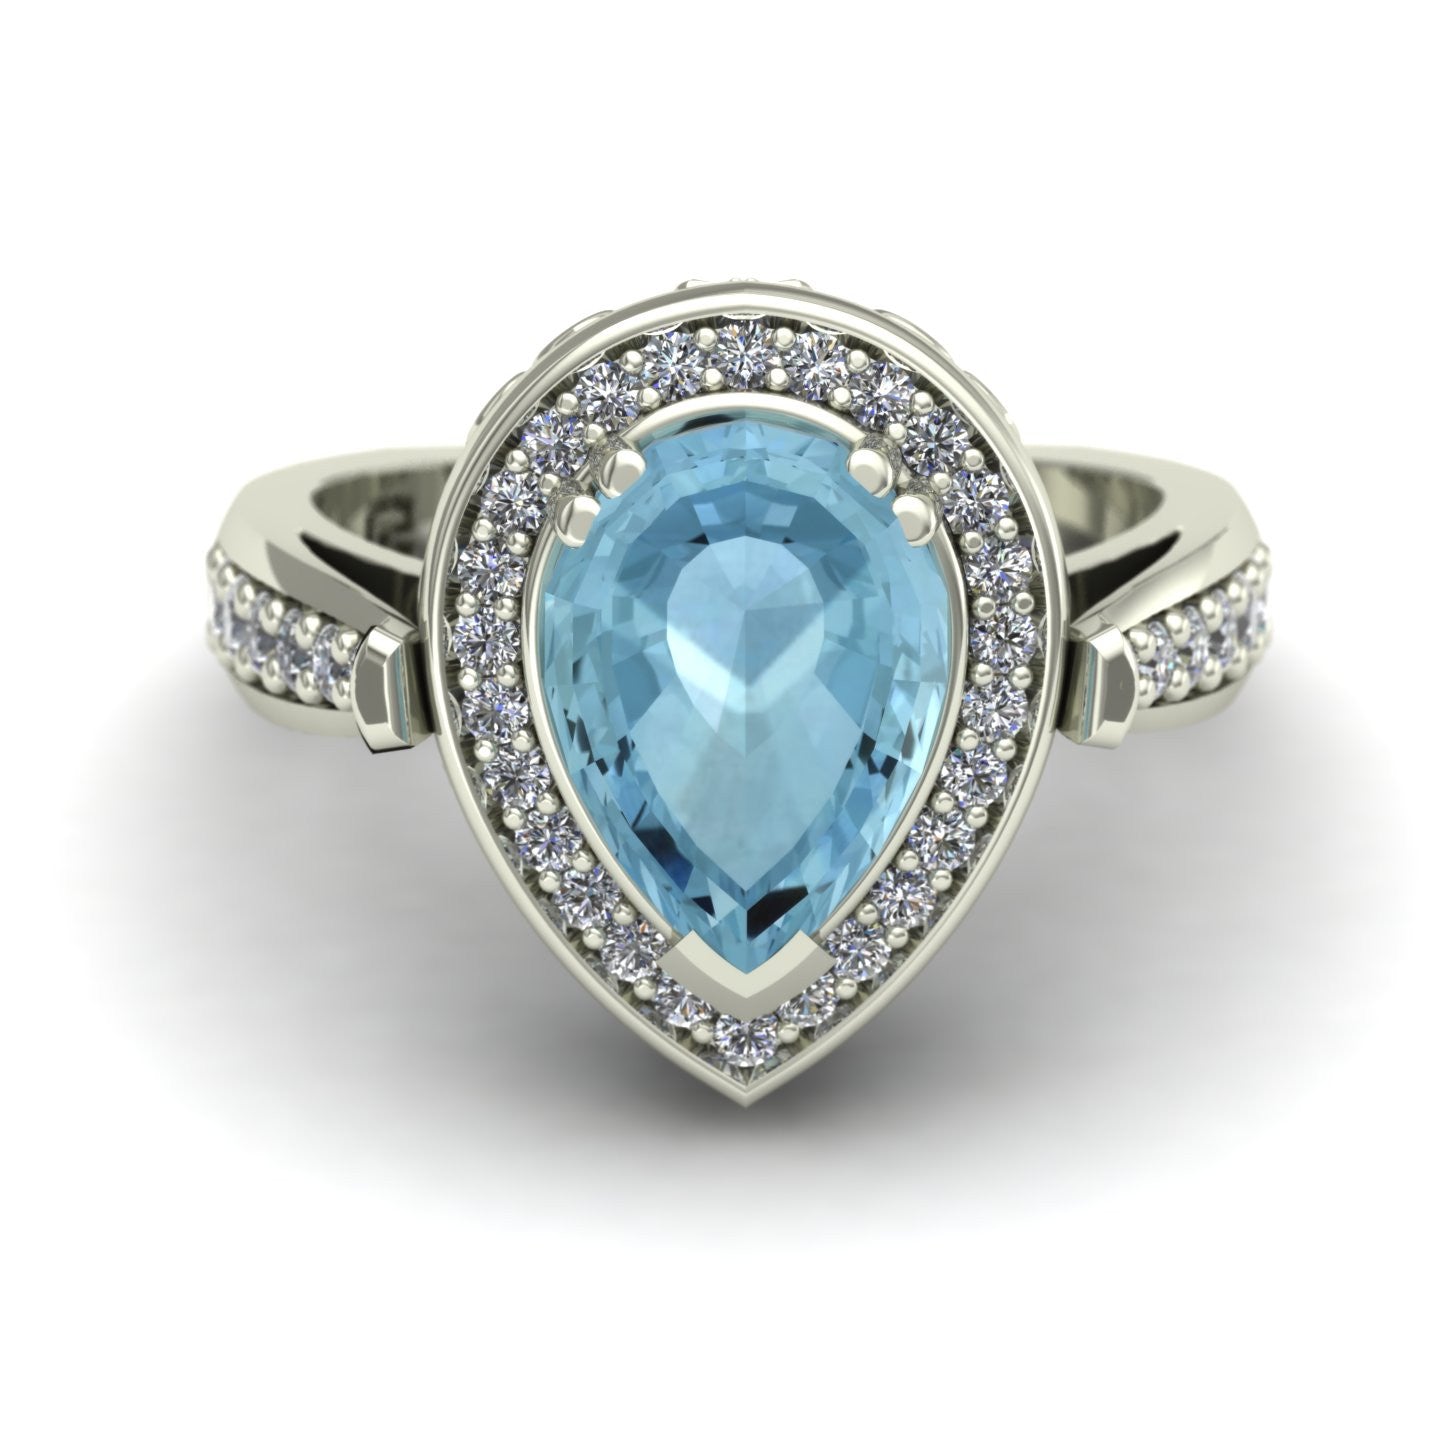 Aquamarine and diamond pear scroll ring in 14k white gold - Charles Babb Designs - top view